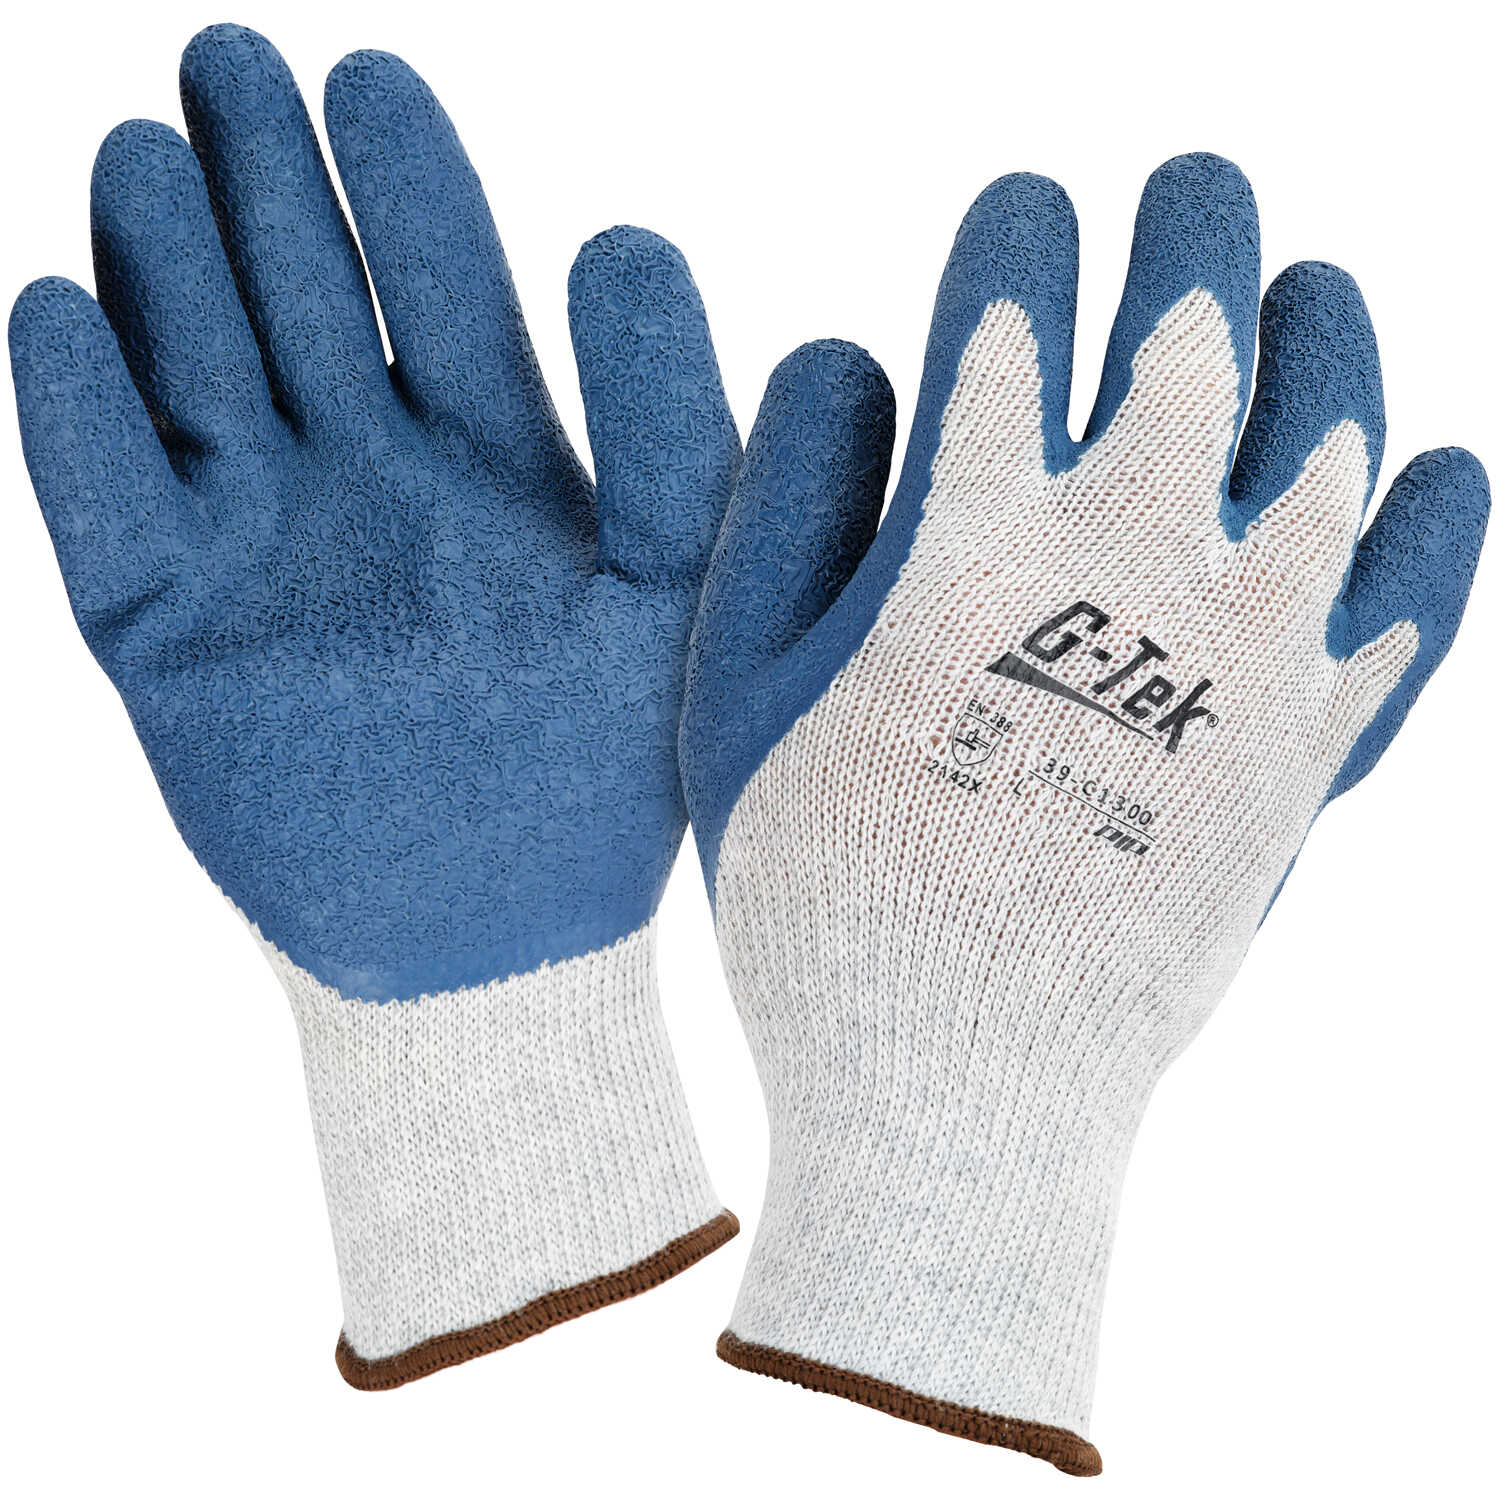 G-Tek Cotton Polyester Work Gloves with Latex Coated Palm 